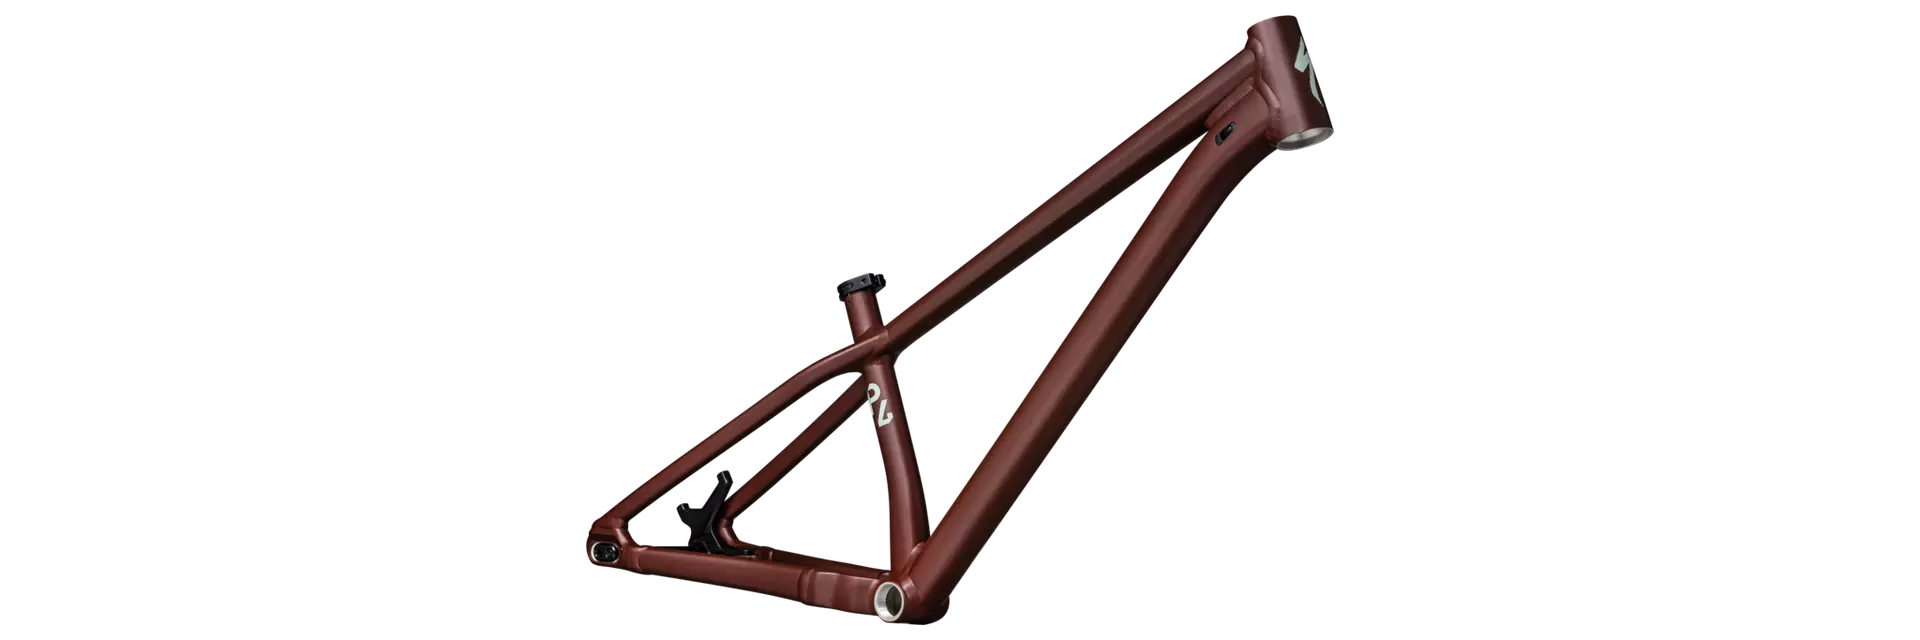 2023 Specialized P Series P4 27.5" Frame